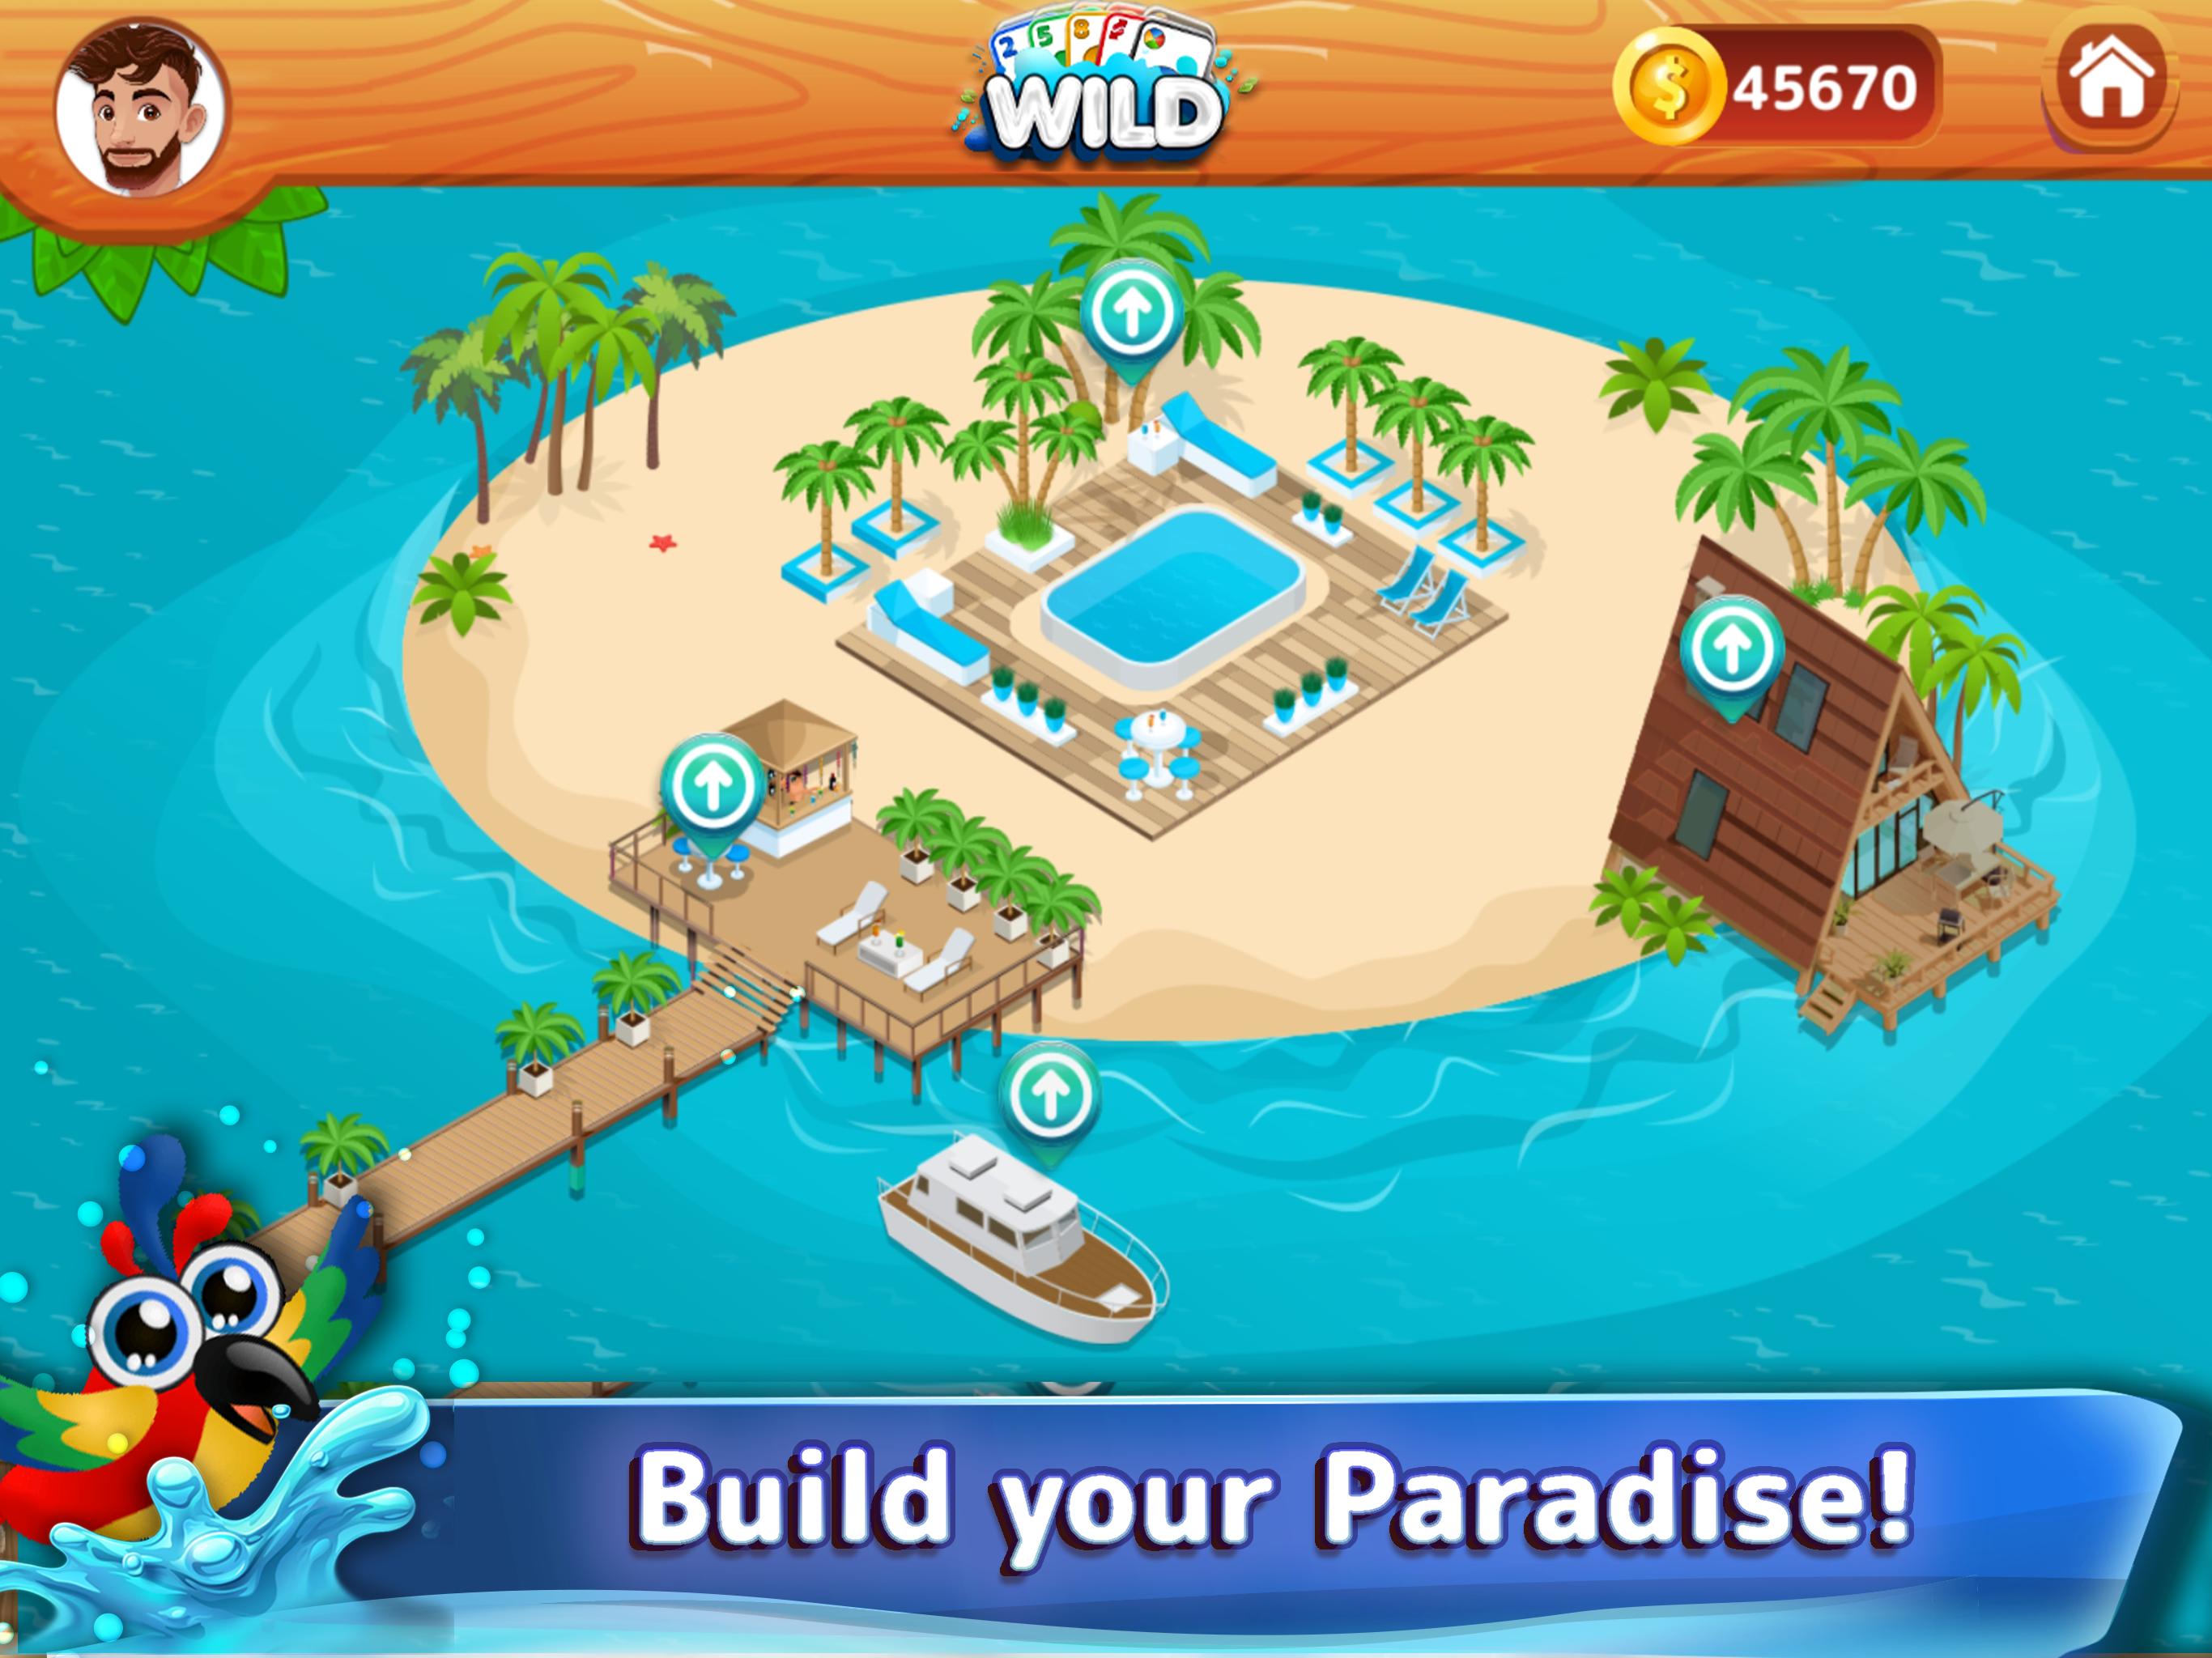 WILD CARDS Online: Multiplayer Games with Friends 3.0.22 Screenshot 14